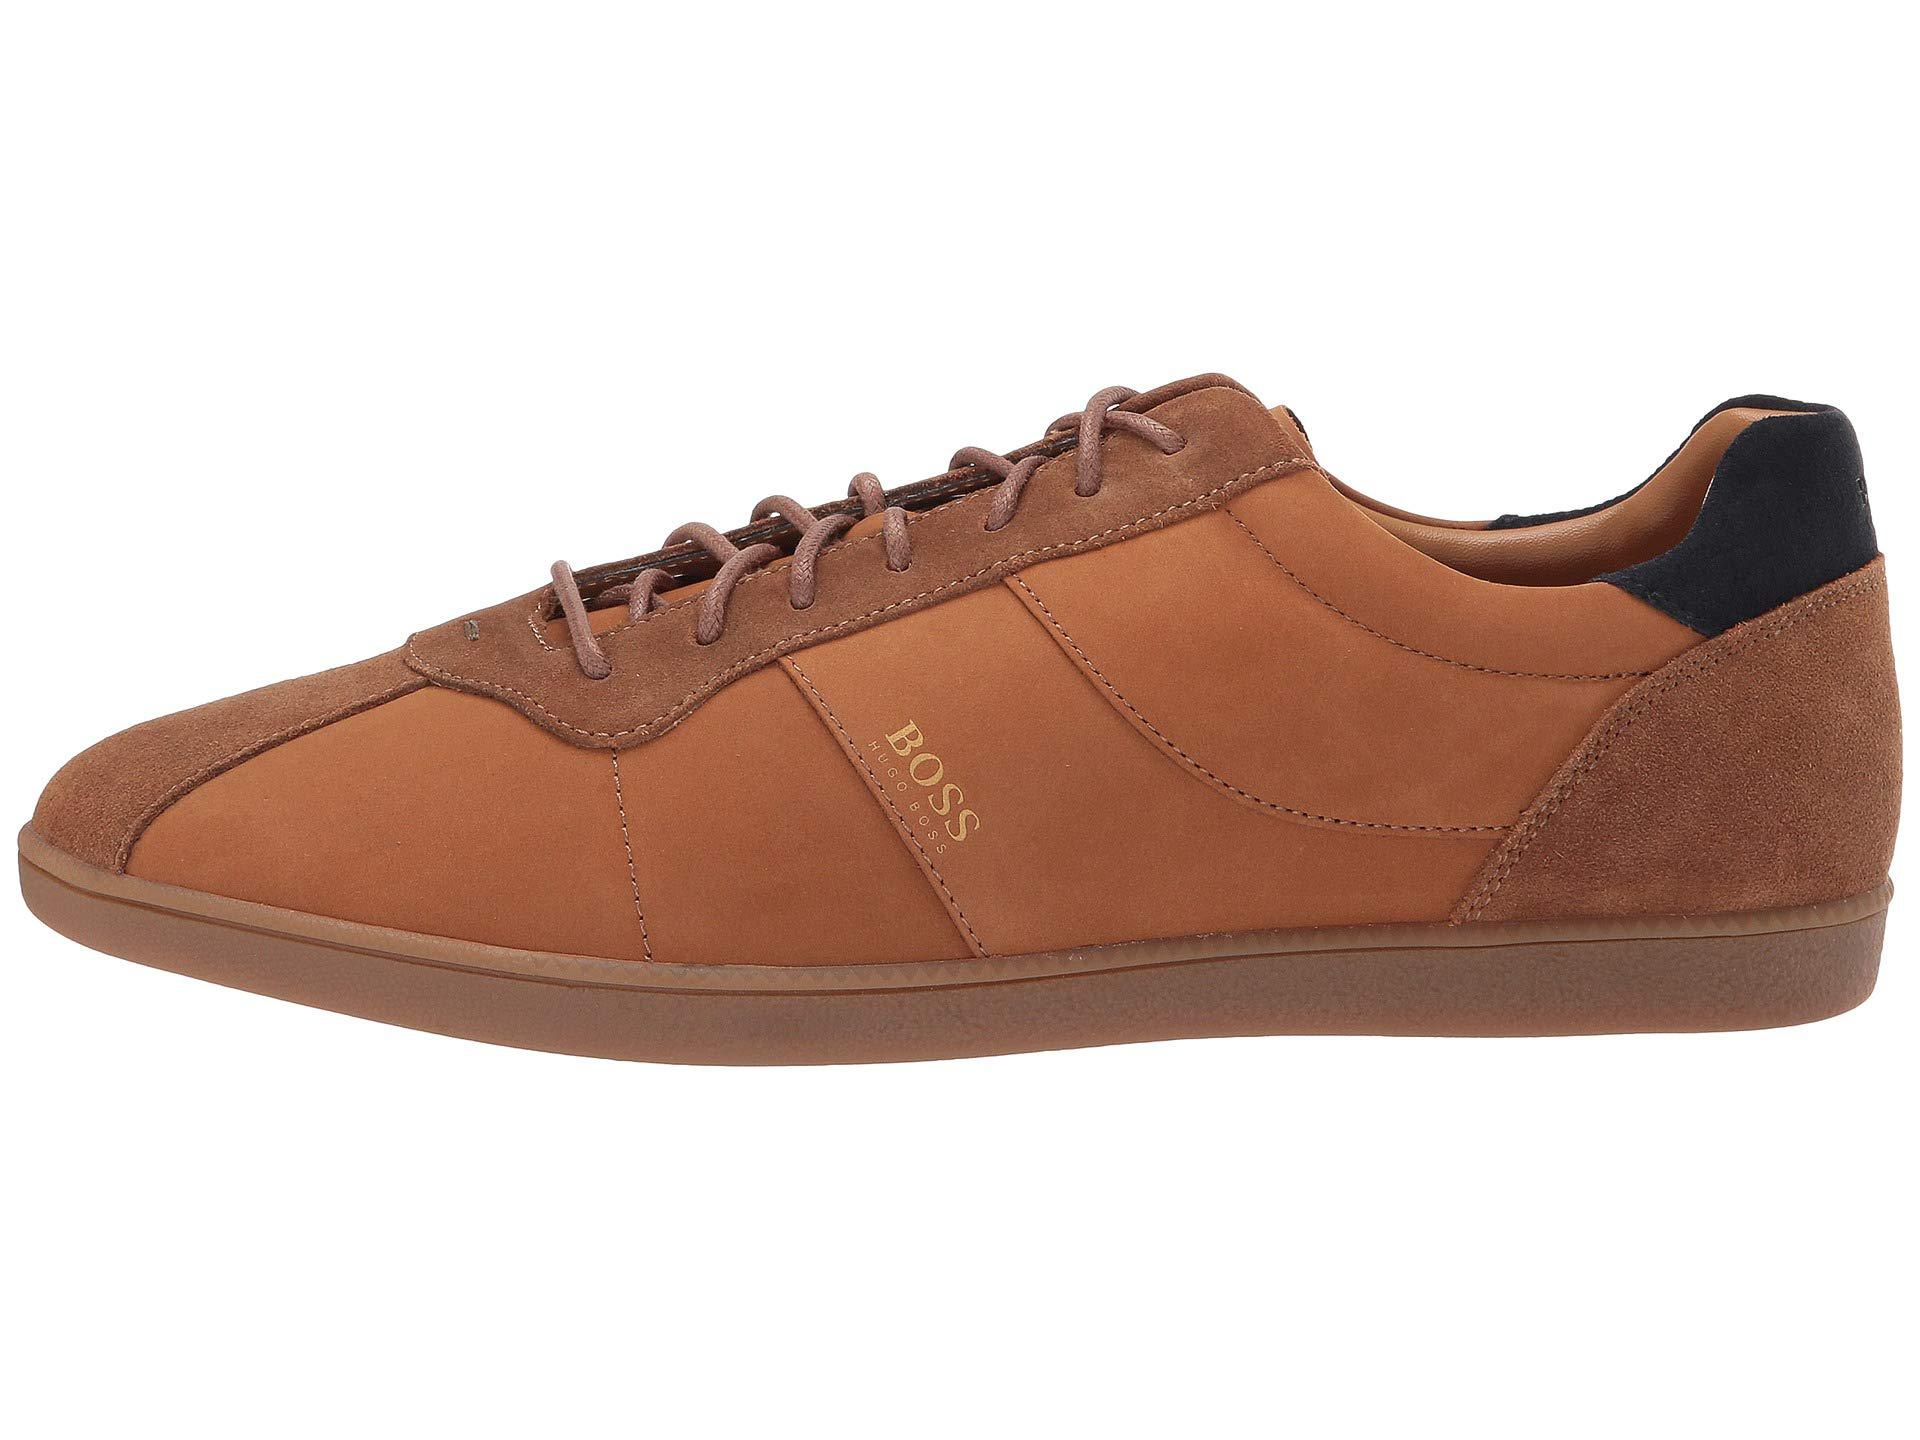 68 Casual Brown suede tennis shoes for Trend in 2022